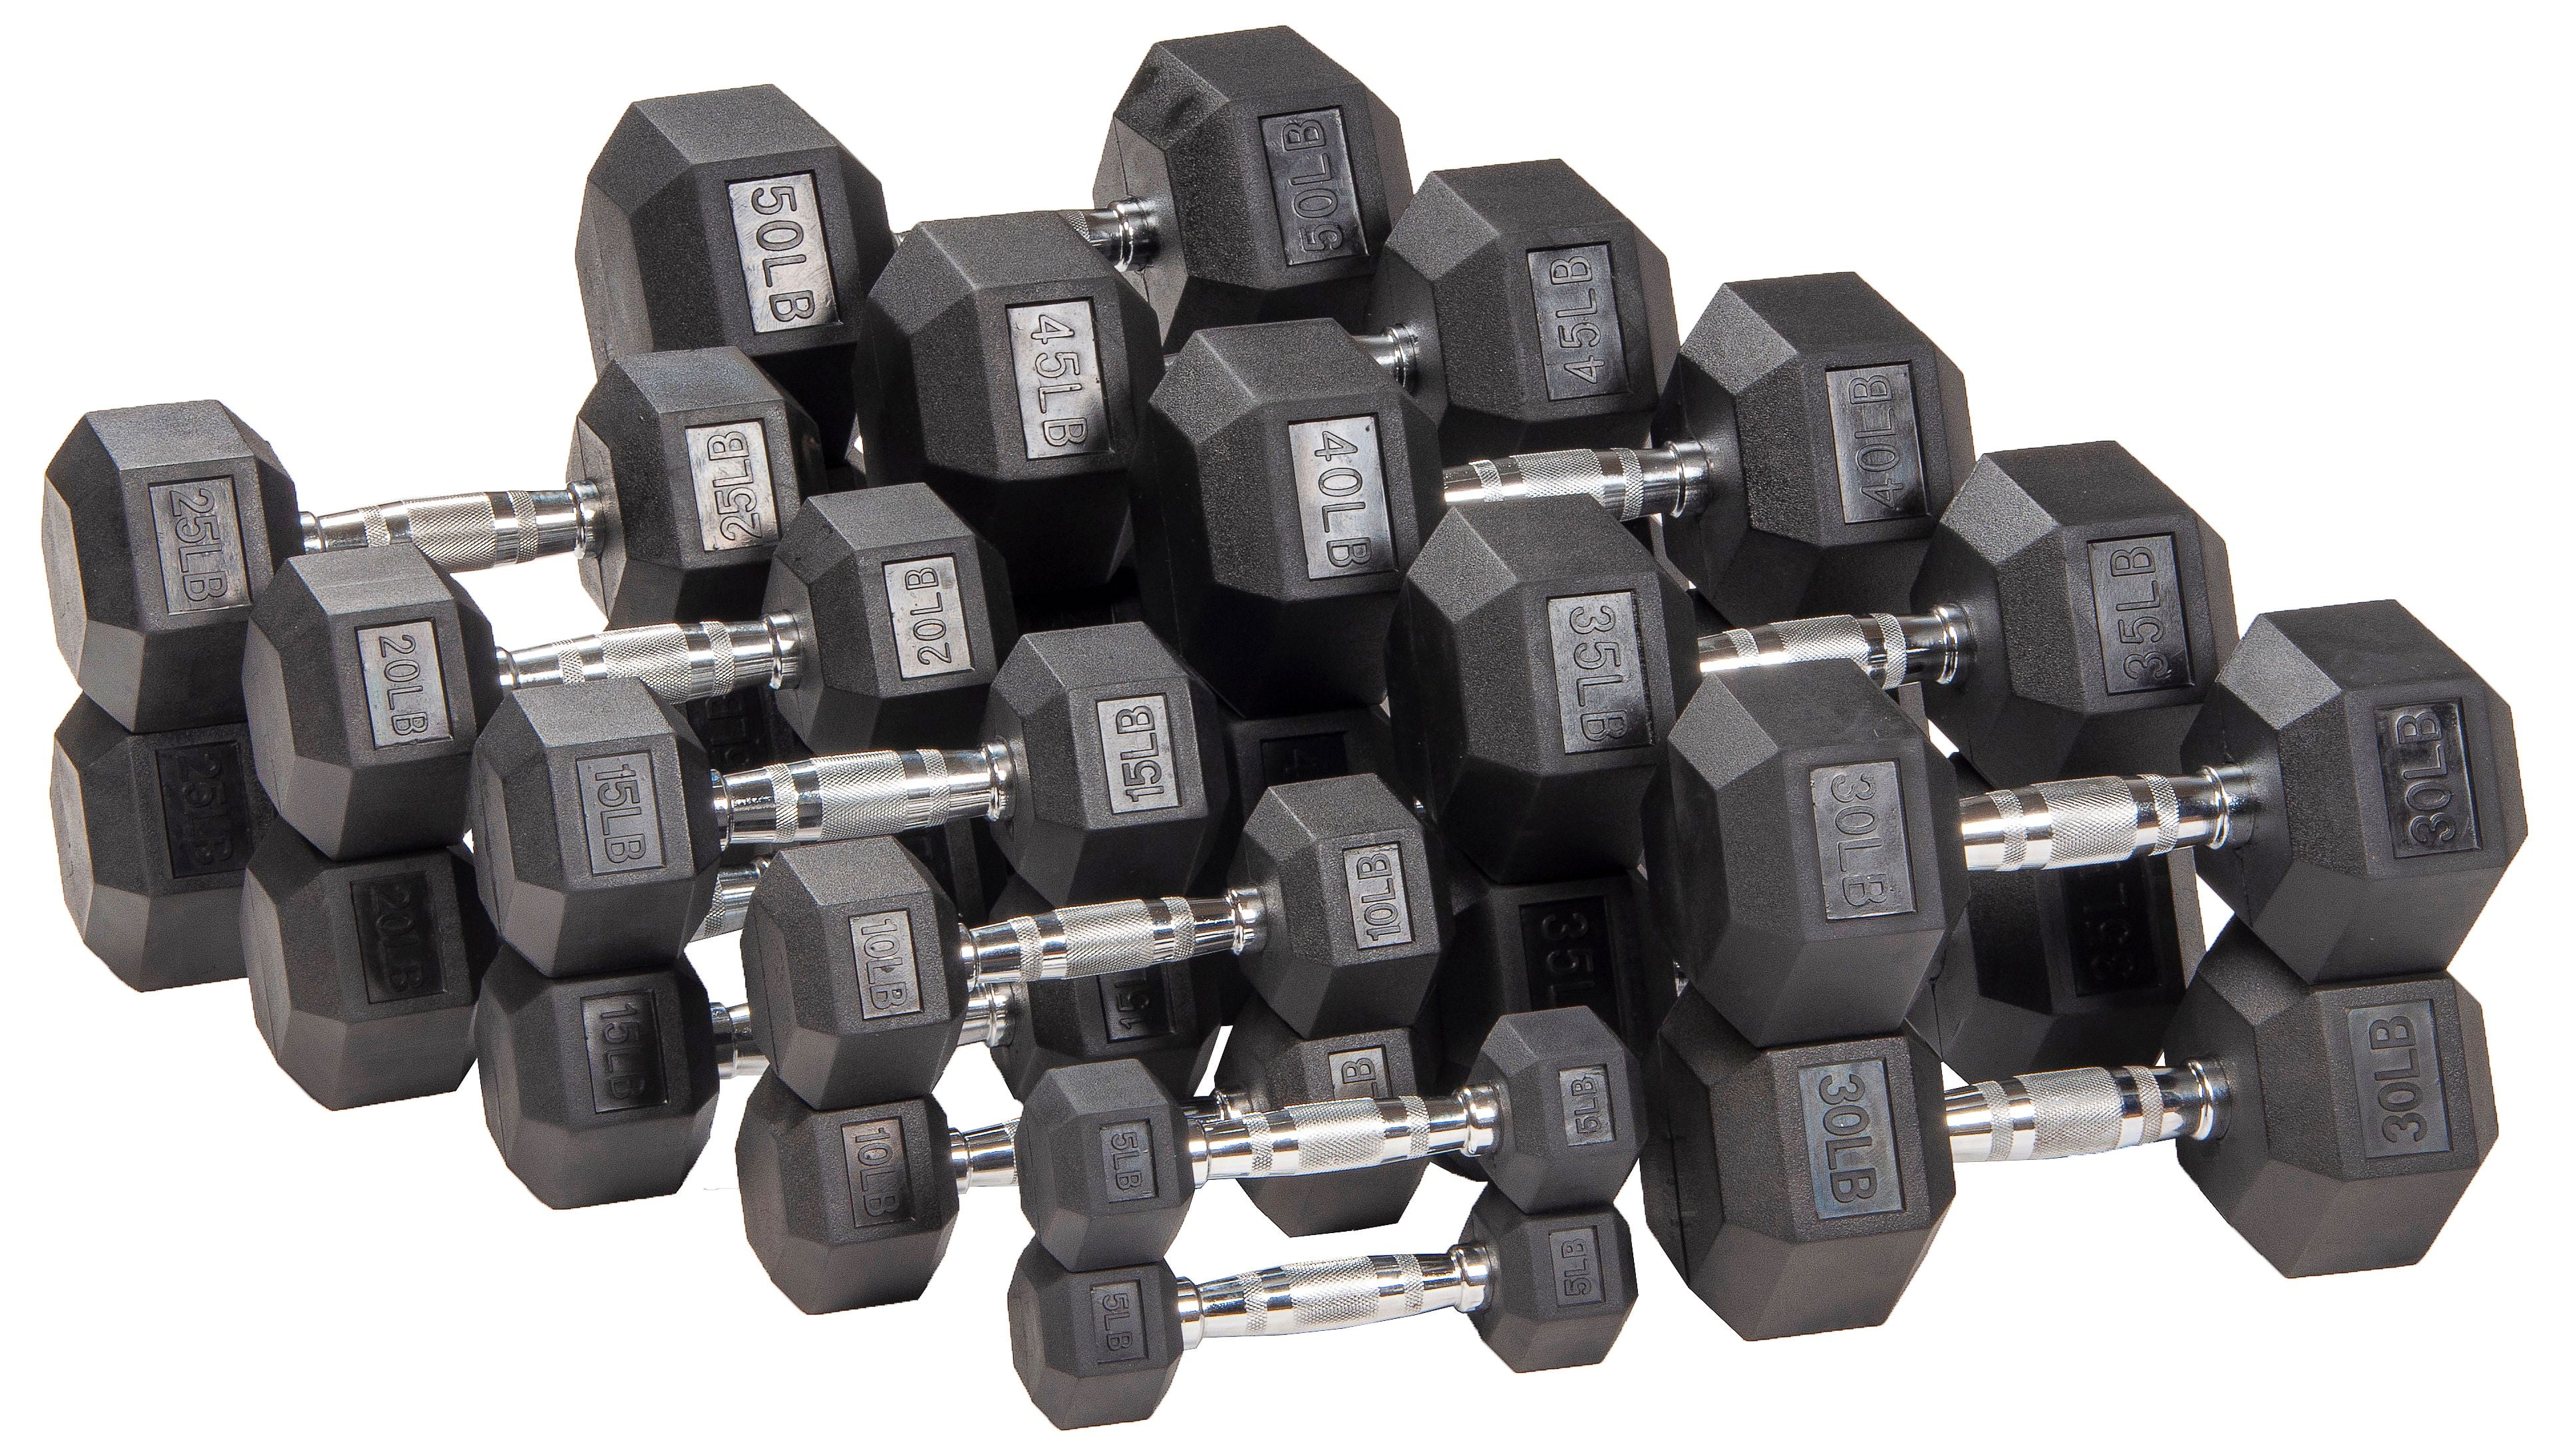 Balancefrom Rubber Encased Hex Dumbbell in Pairs